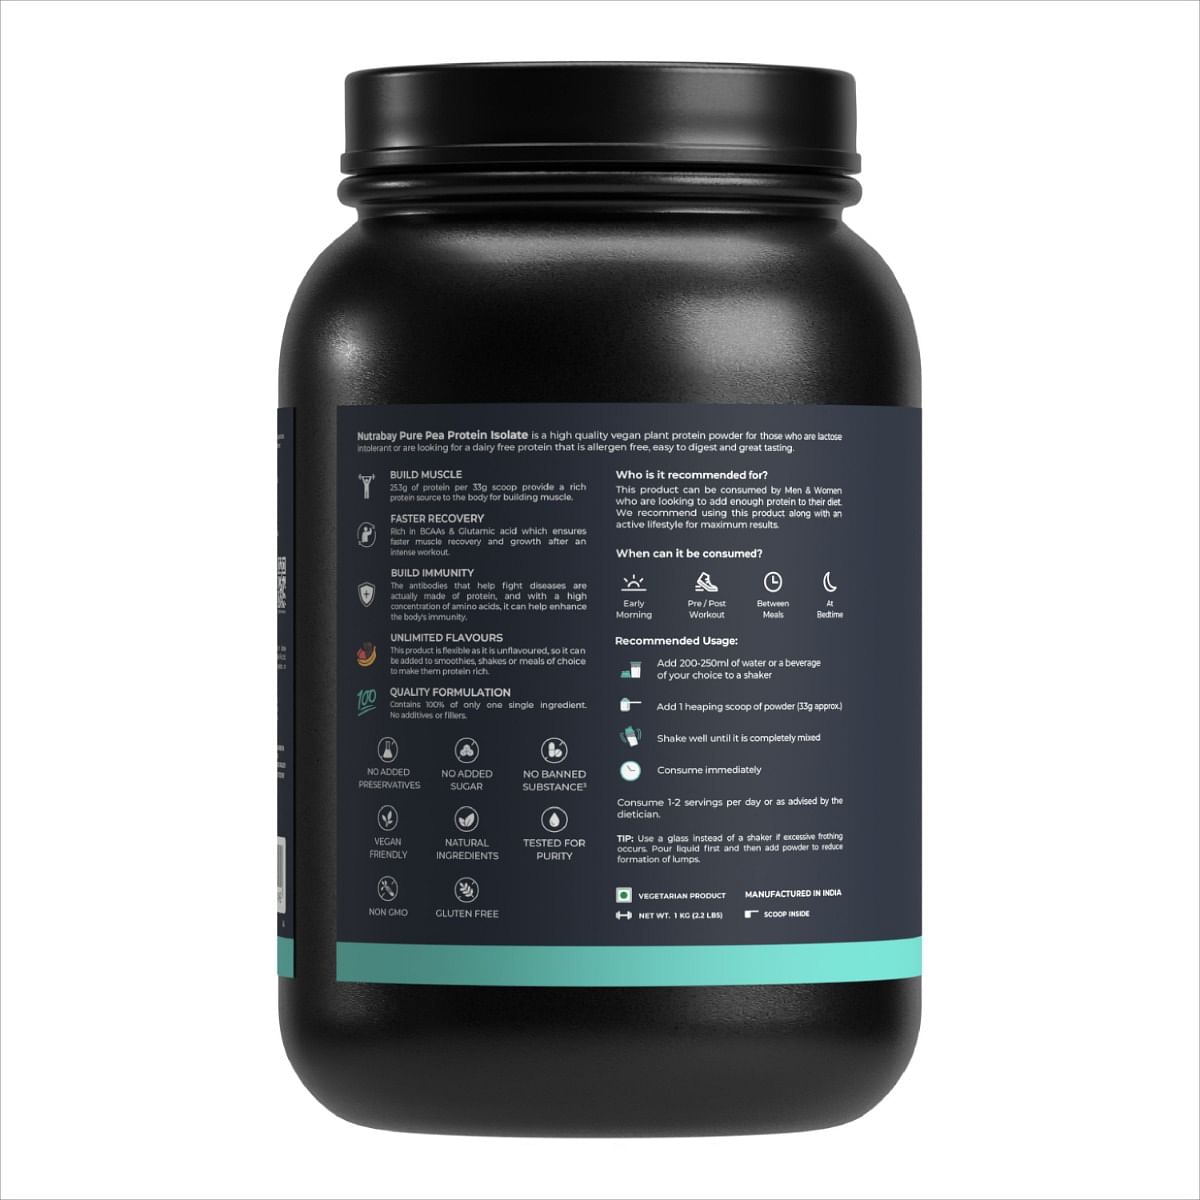 Nutrabay Pure Pea Protein Isolate 1kg  30 Servings  25.3g Protein  Unflavoured  Build Muscle  Fast Recovery